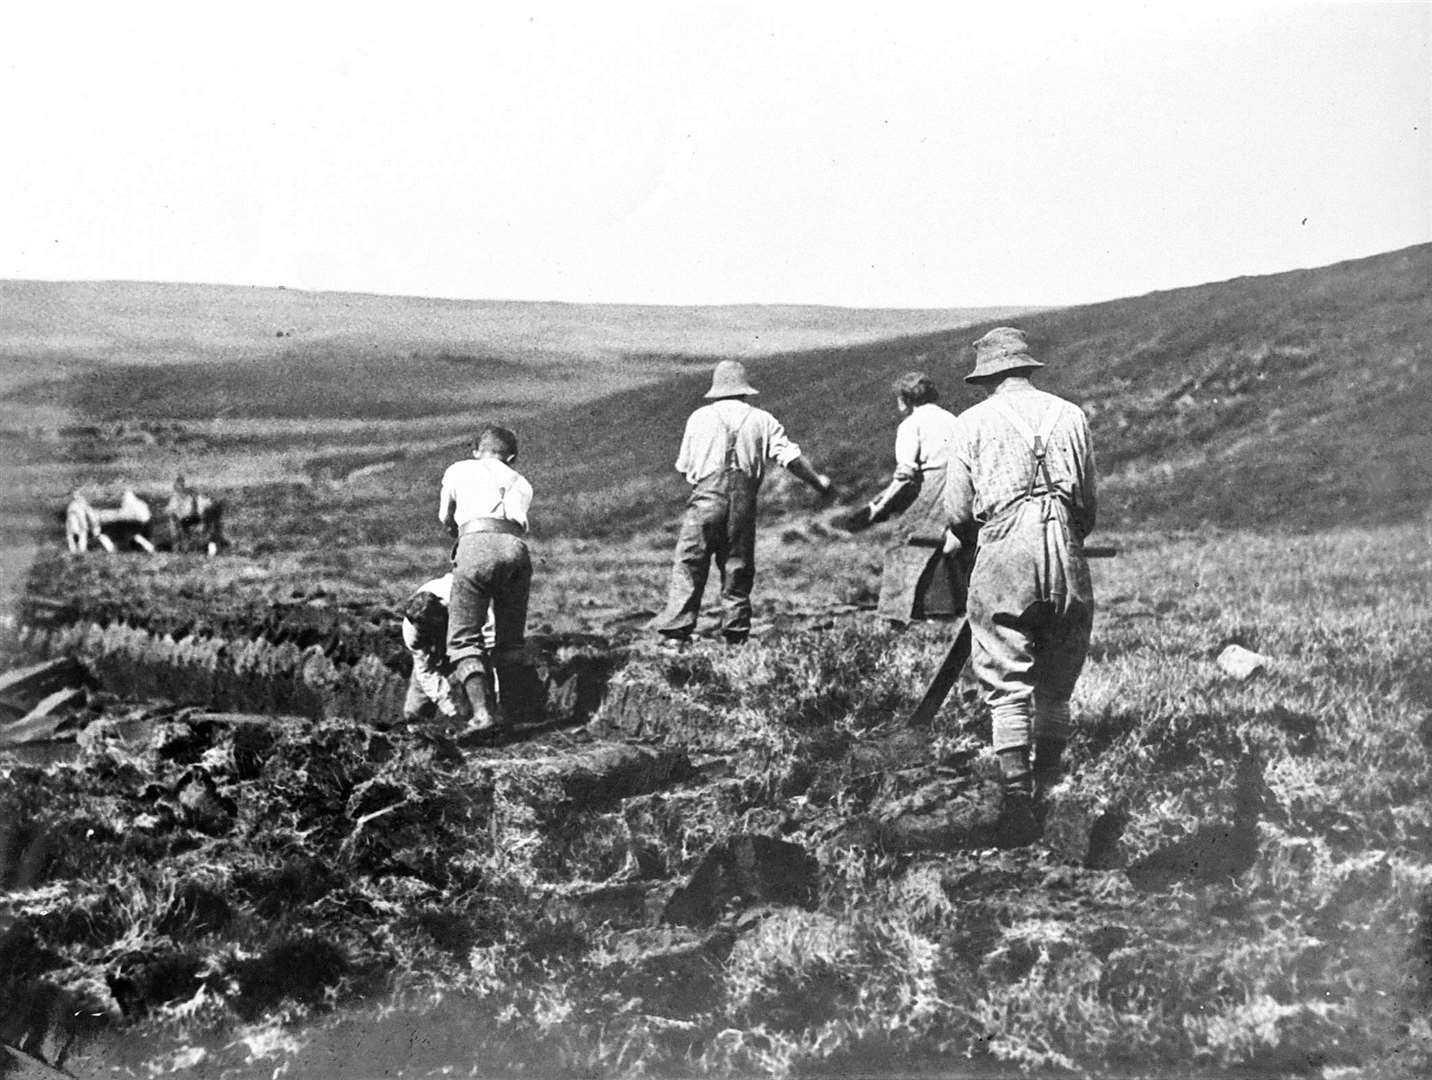 Peat-cutting in progress around 1930, a classic Caithness agricultural scene. Picture: Nucleus: The Nuclear and Caithness Archives